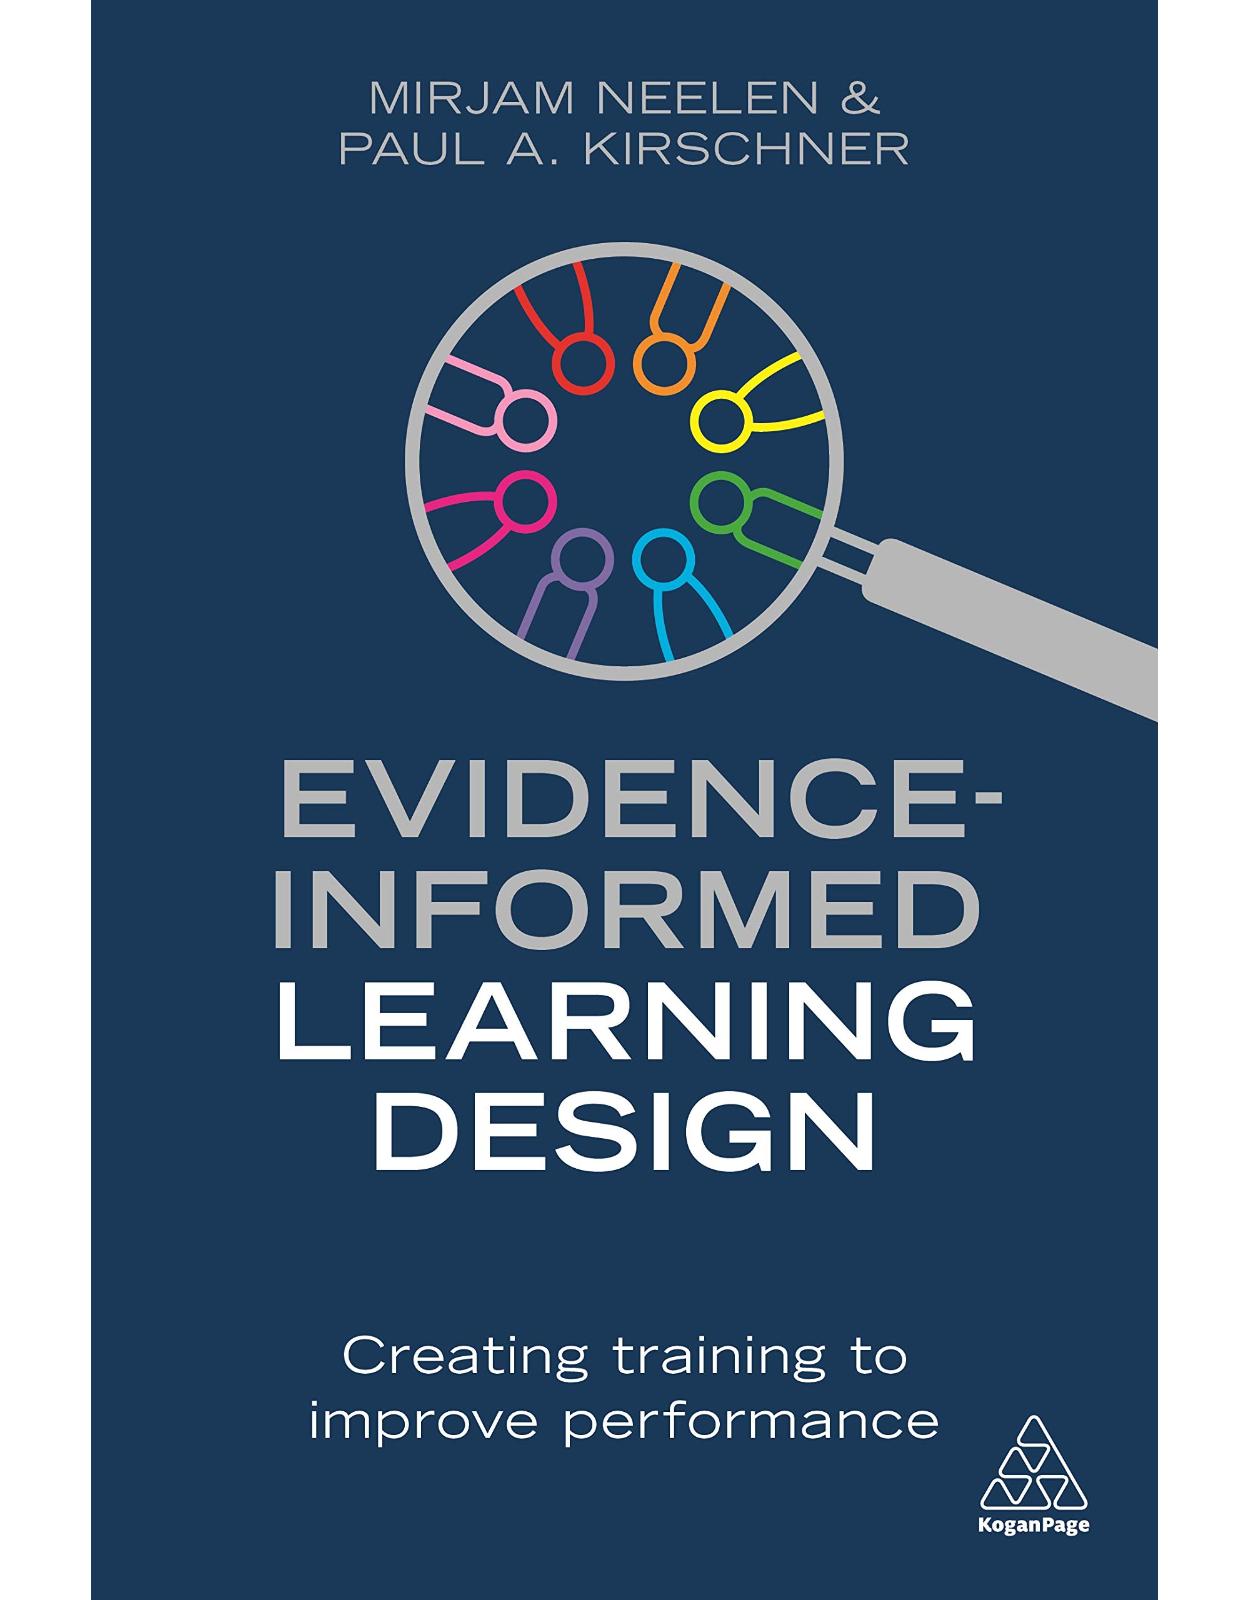 Evidence-Informed Learning Design: Use Evidence to Create Training which Improves Performance